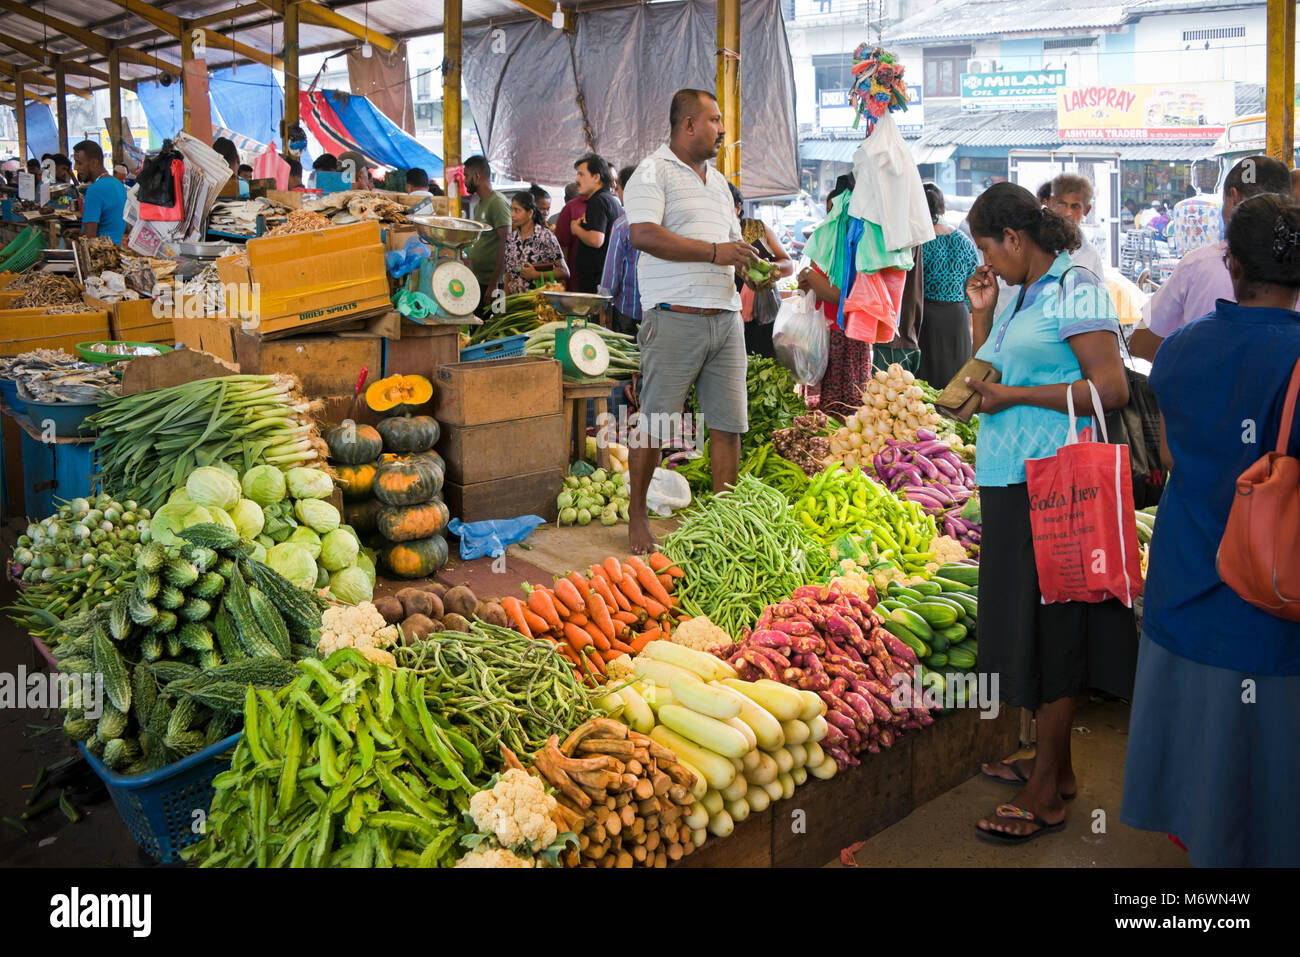 Horizontal view of fruit and vegetable stalls at Pettah market in Colombo, Sri Lanka. Stock Photo